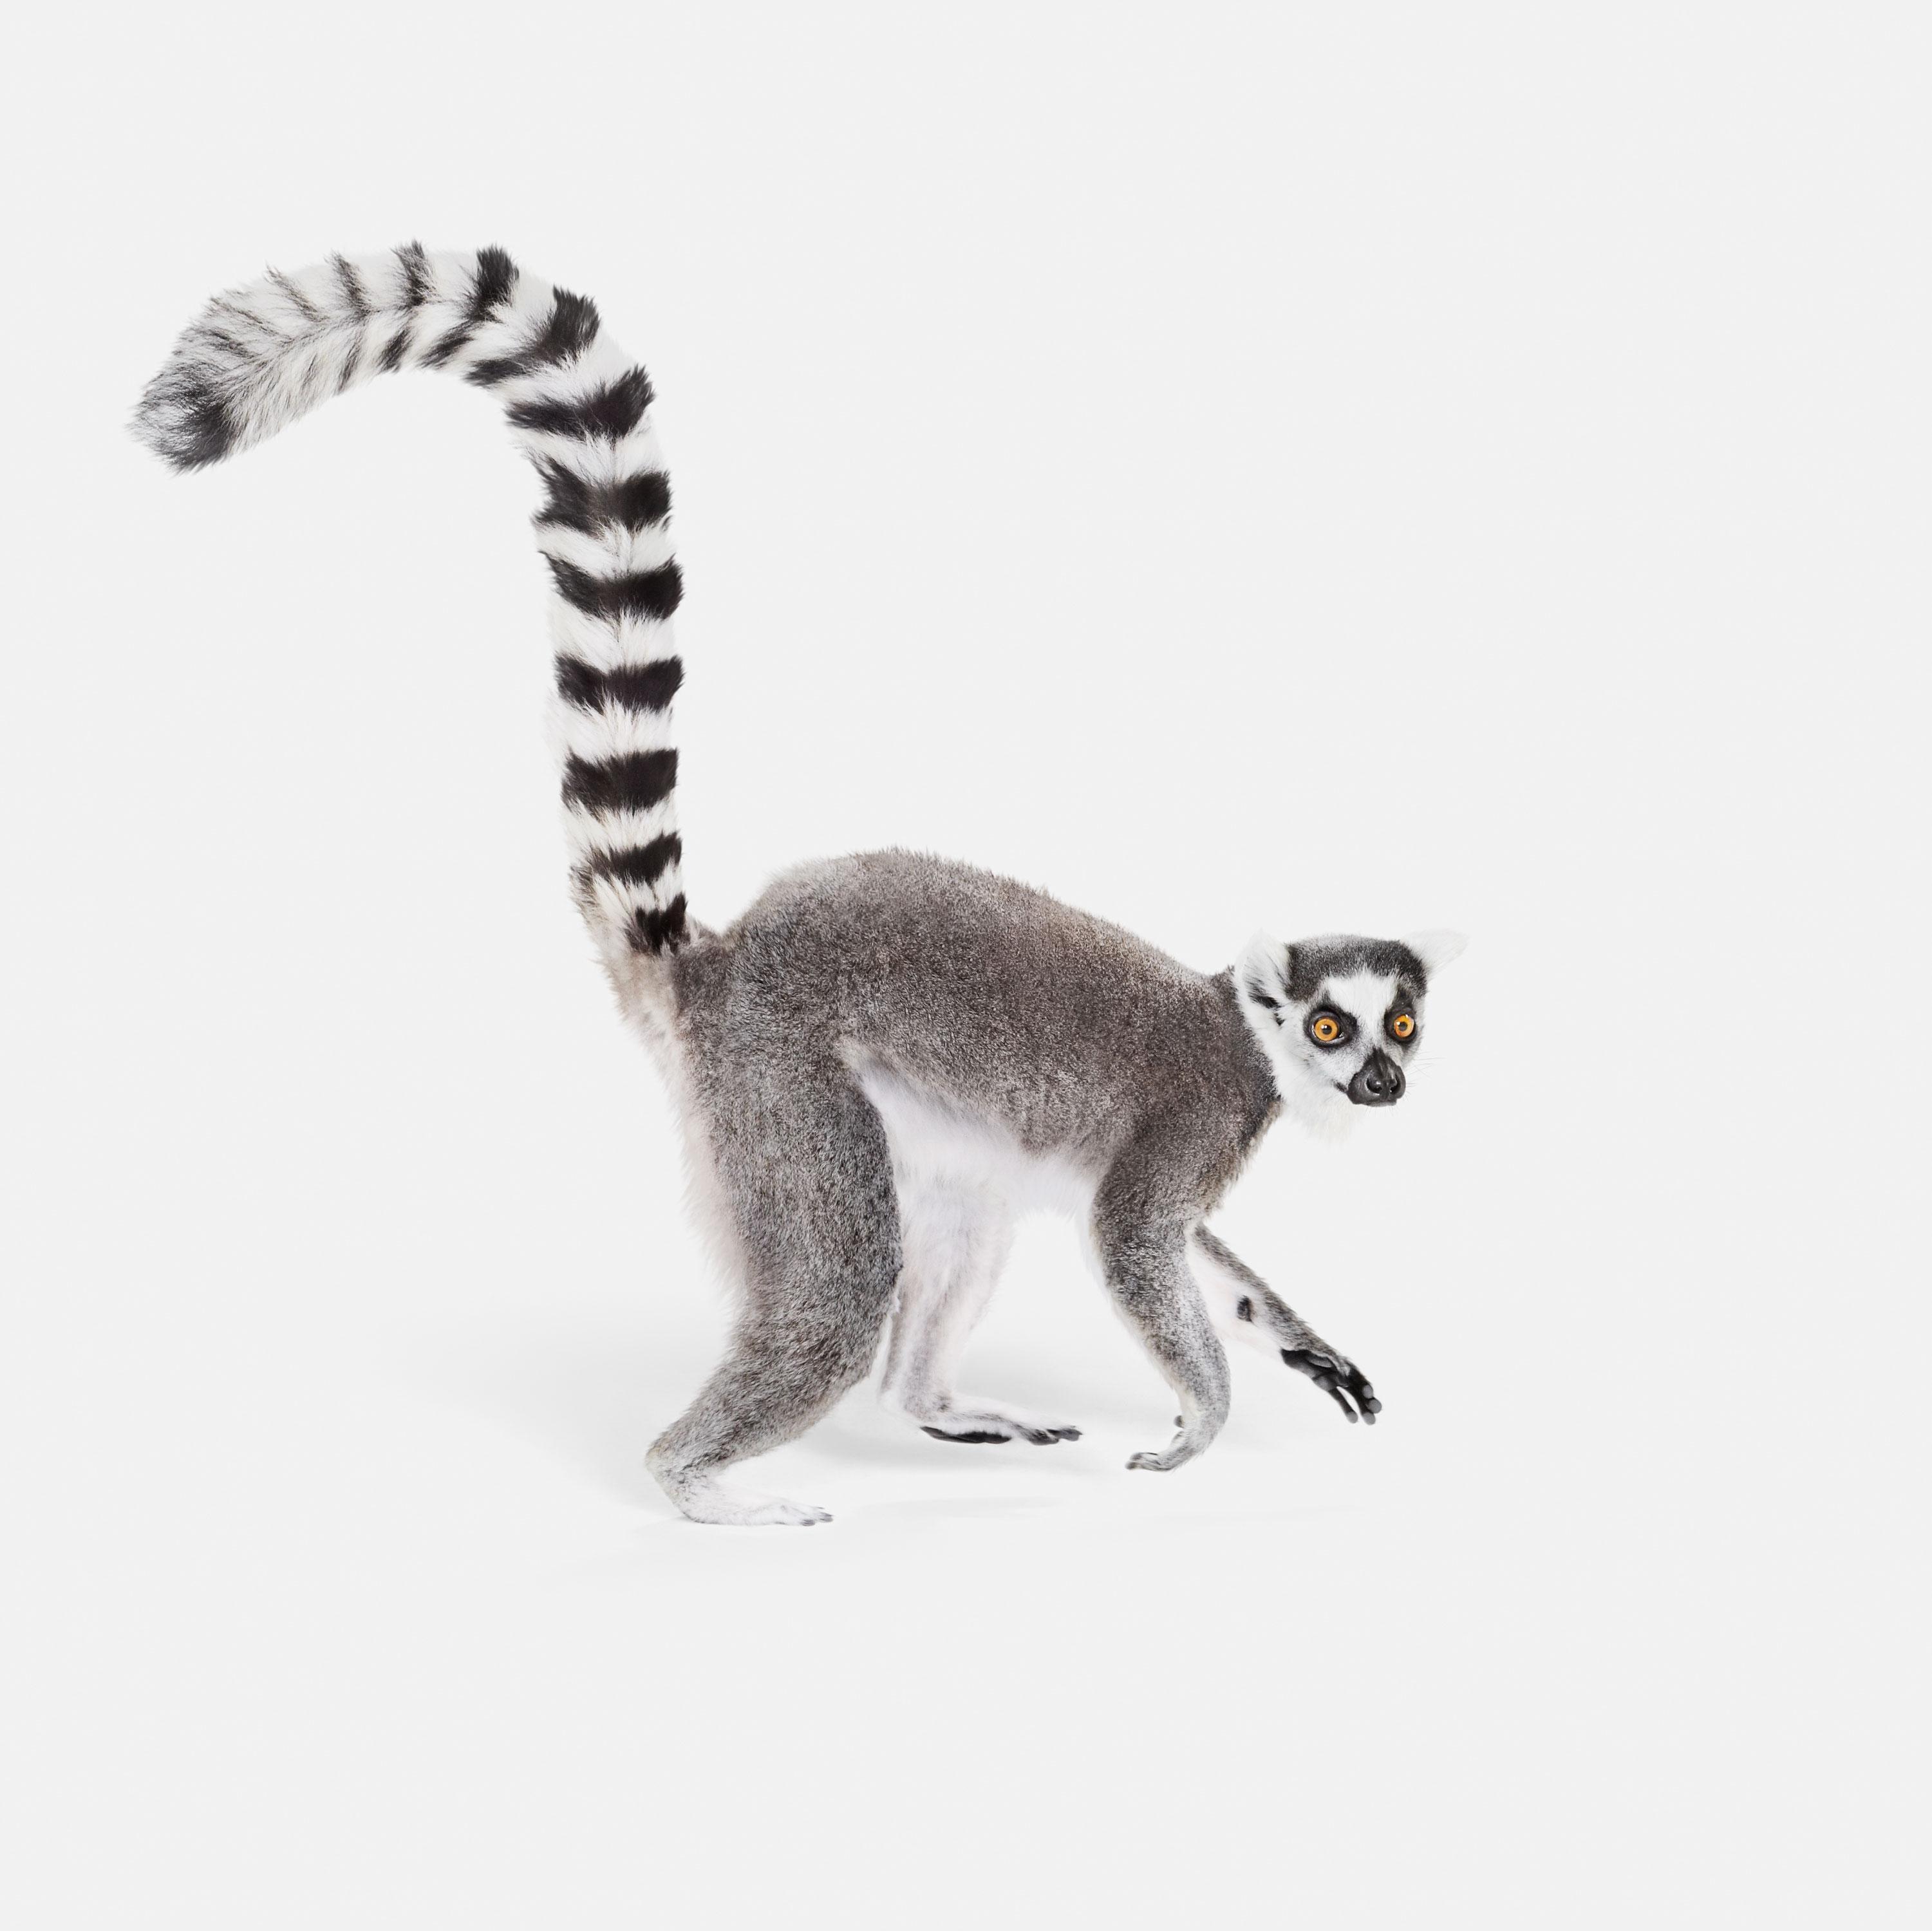 Randal Ford - Ring Tailed Lemur, Photography 2018